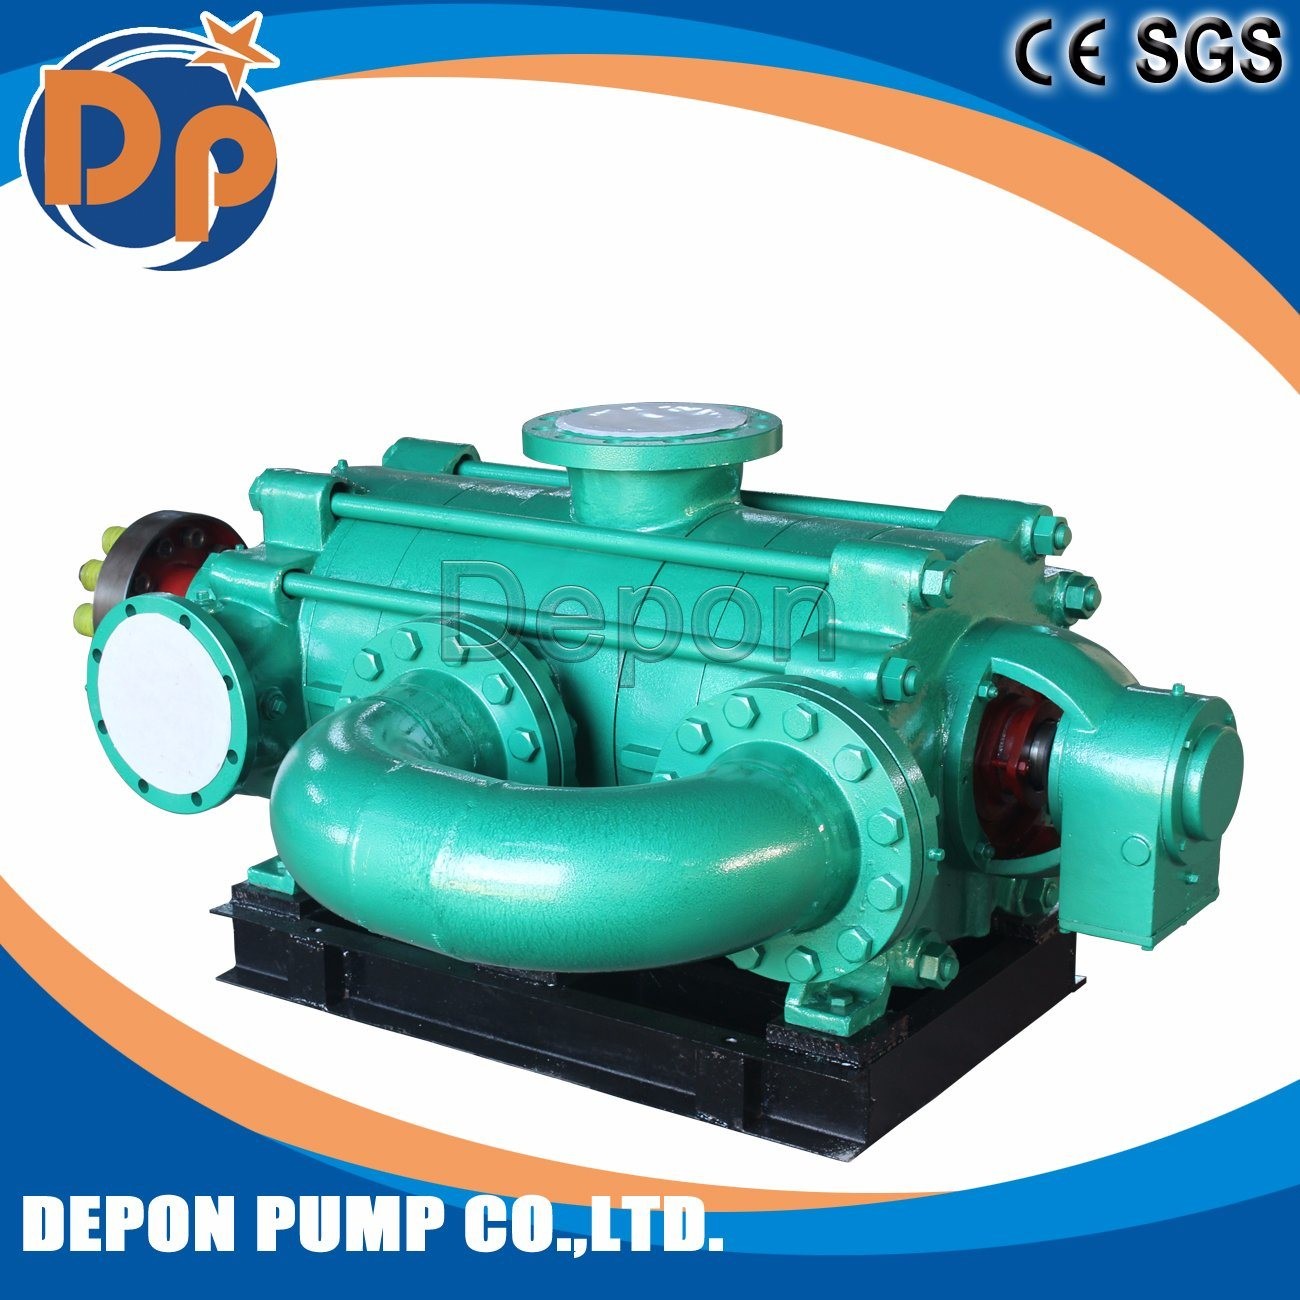 High-Rise Building High Pressure Multistage Centrifugal Pump Price